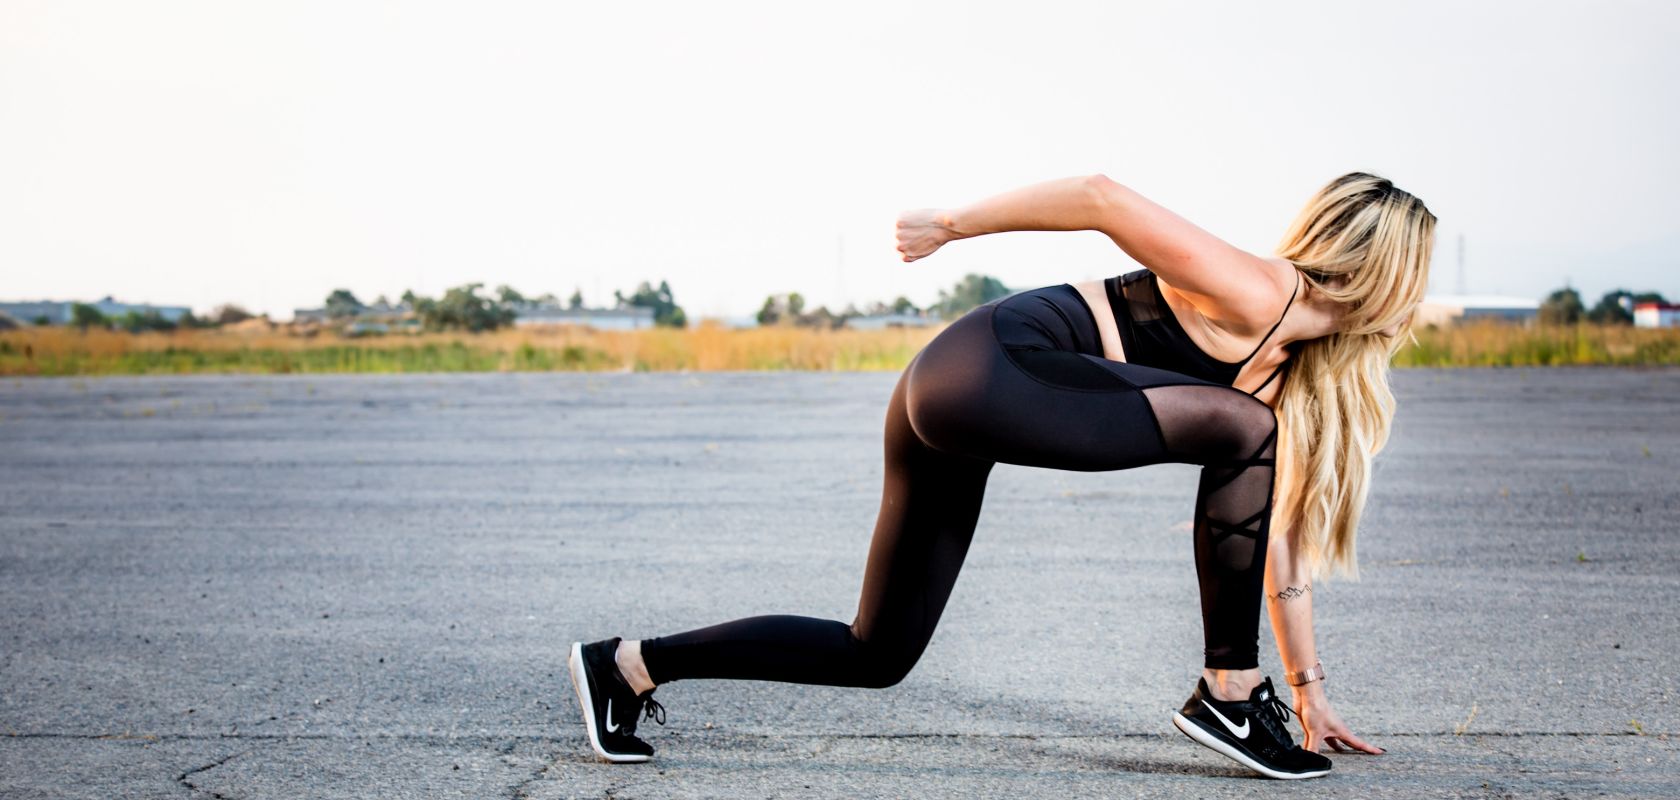 Are Leggings Disrespectful? Why One Woman Thinks Yoga Pants Are an